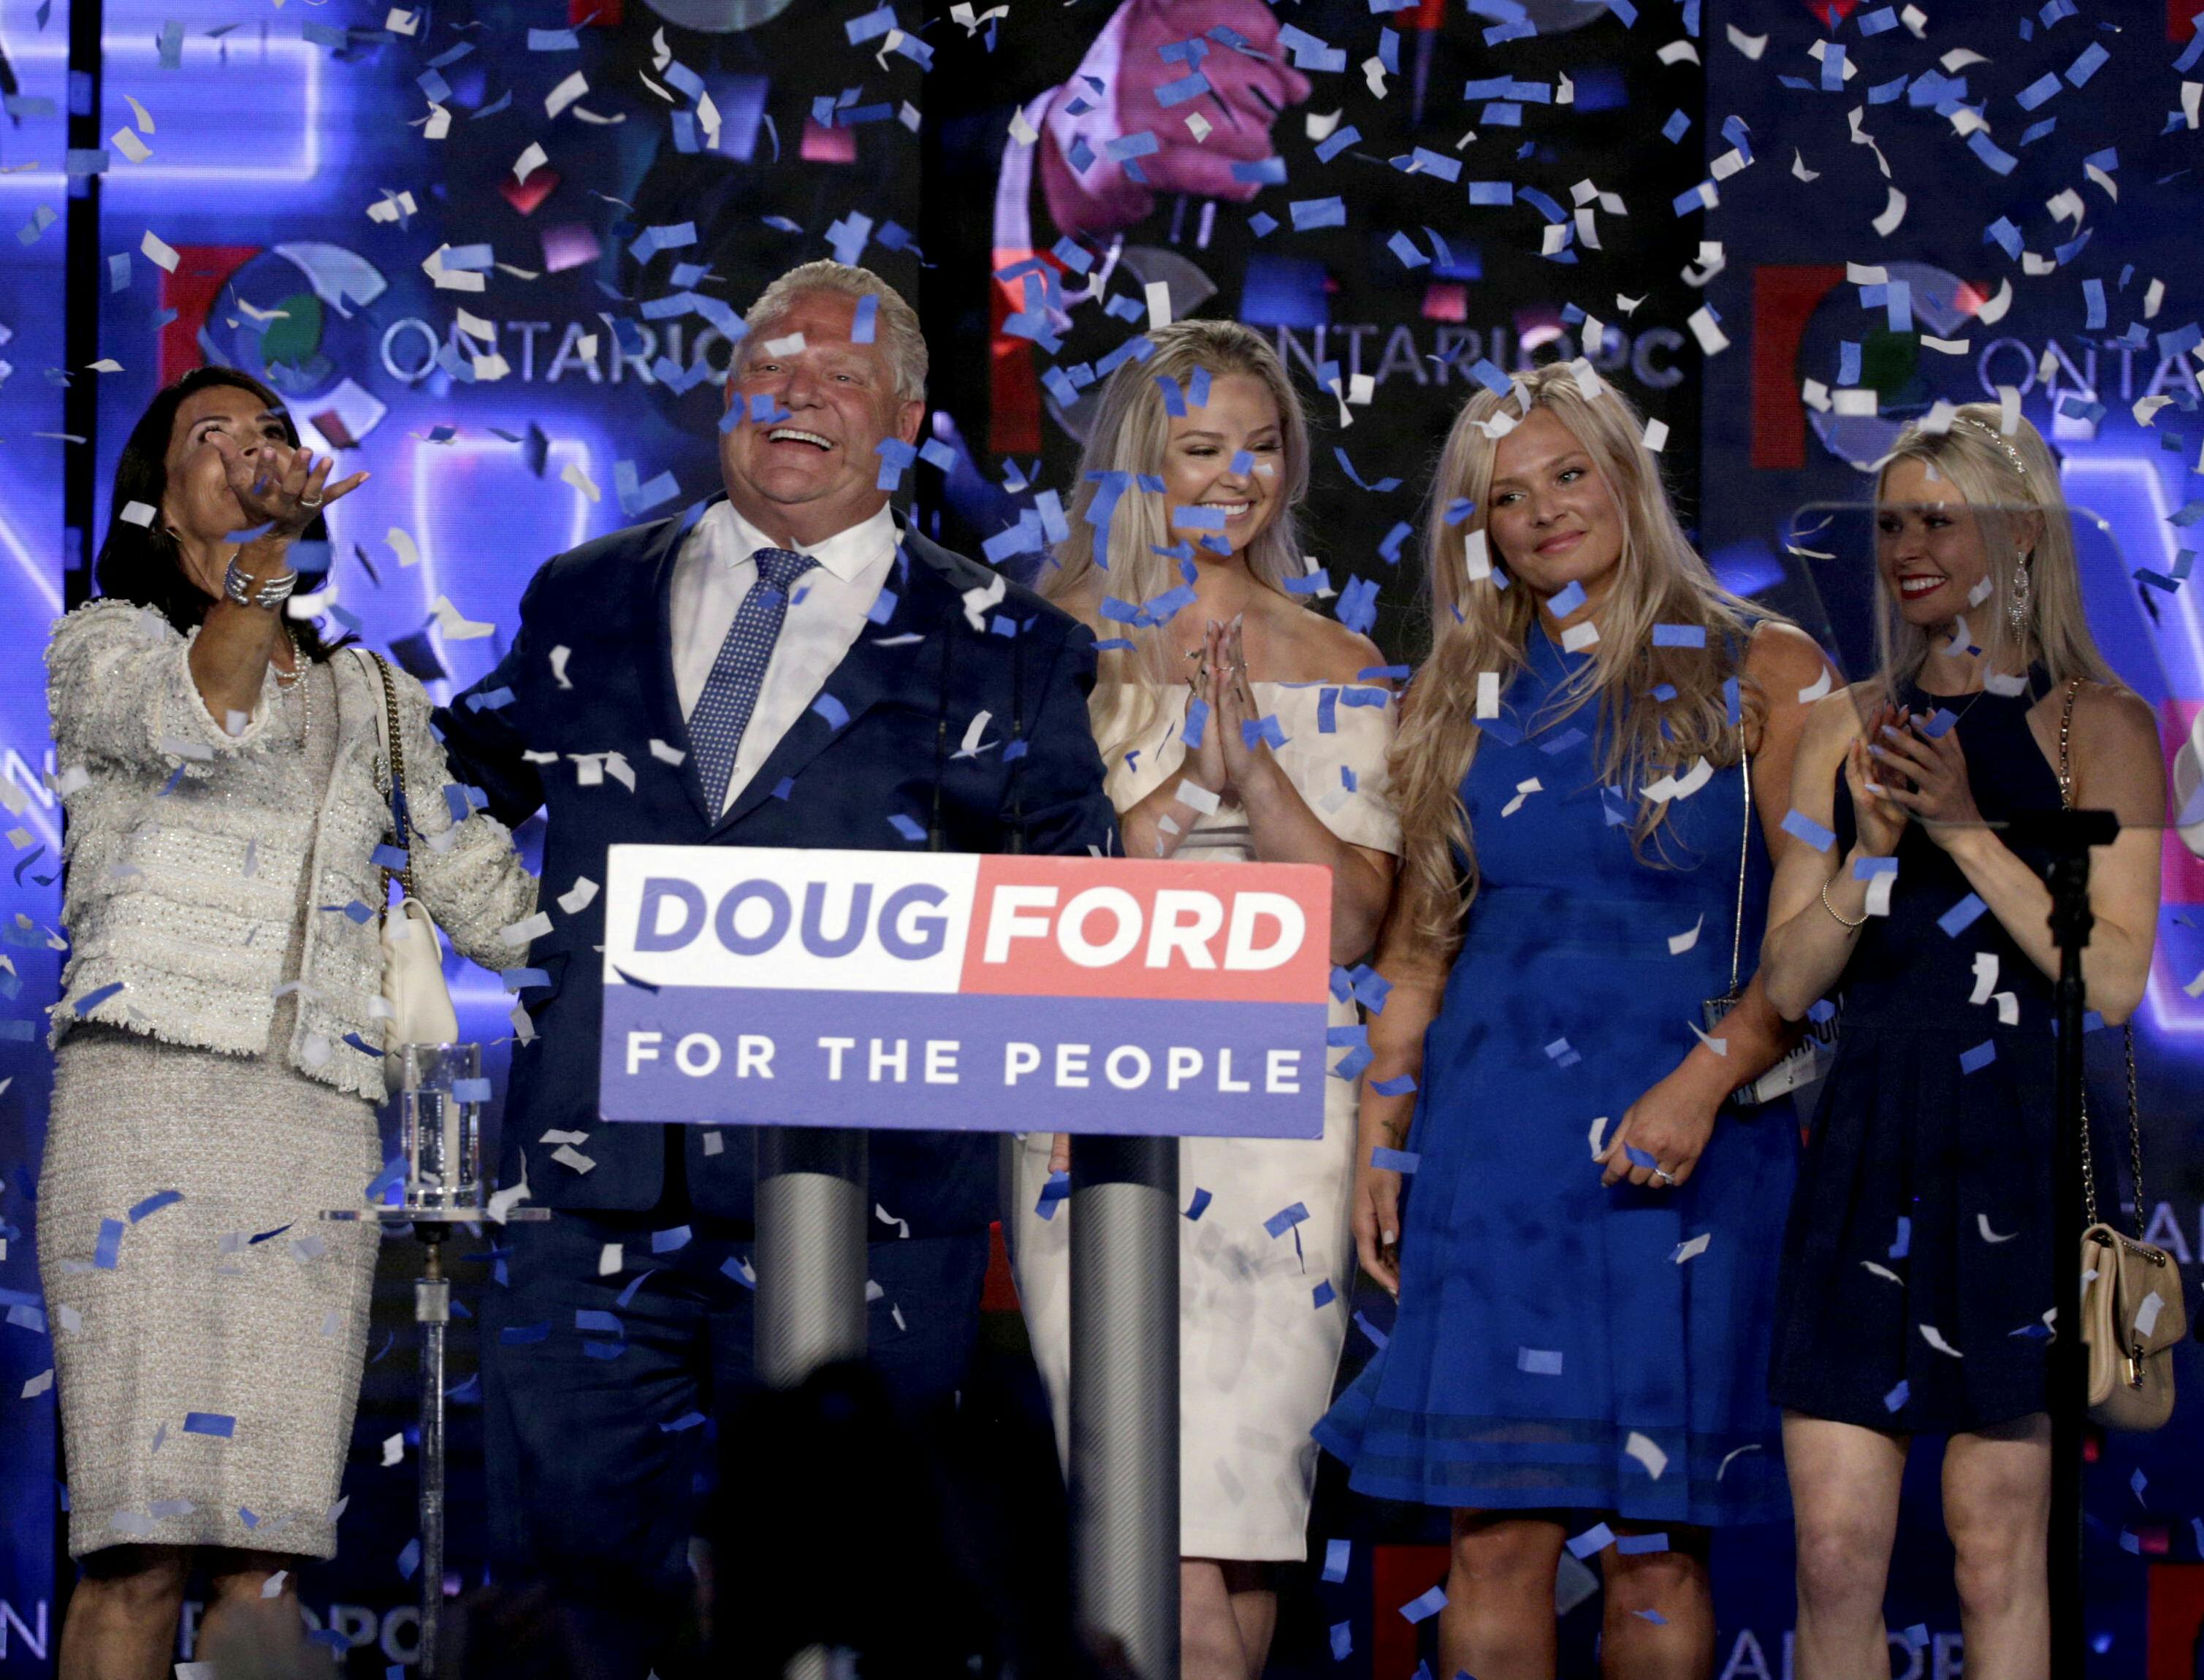 Ford’s PCs widen gap with voters, but are in minority range: poll